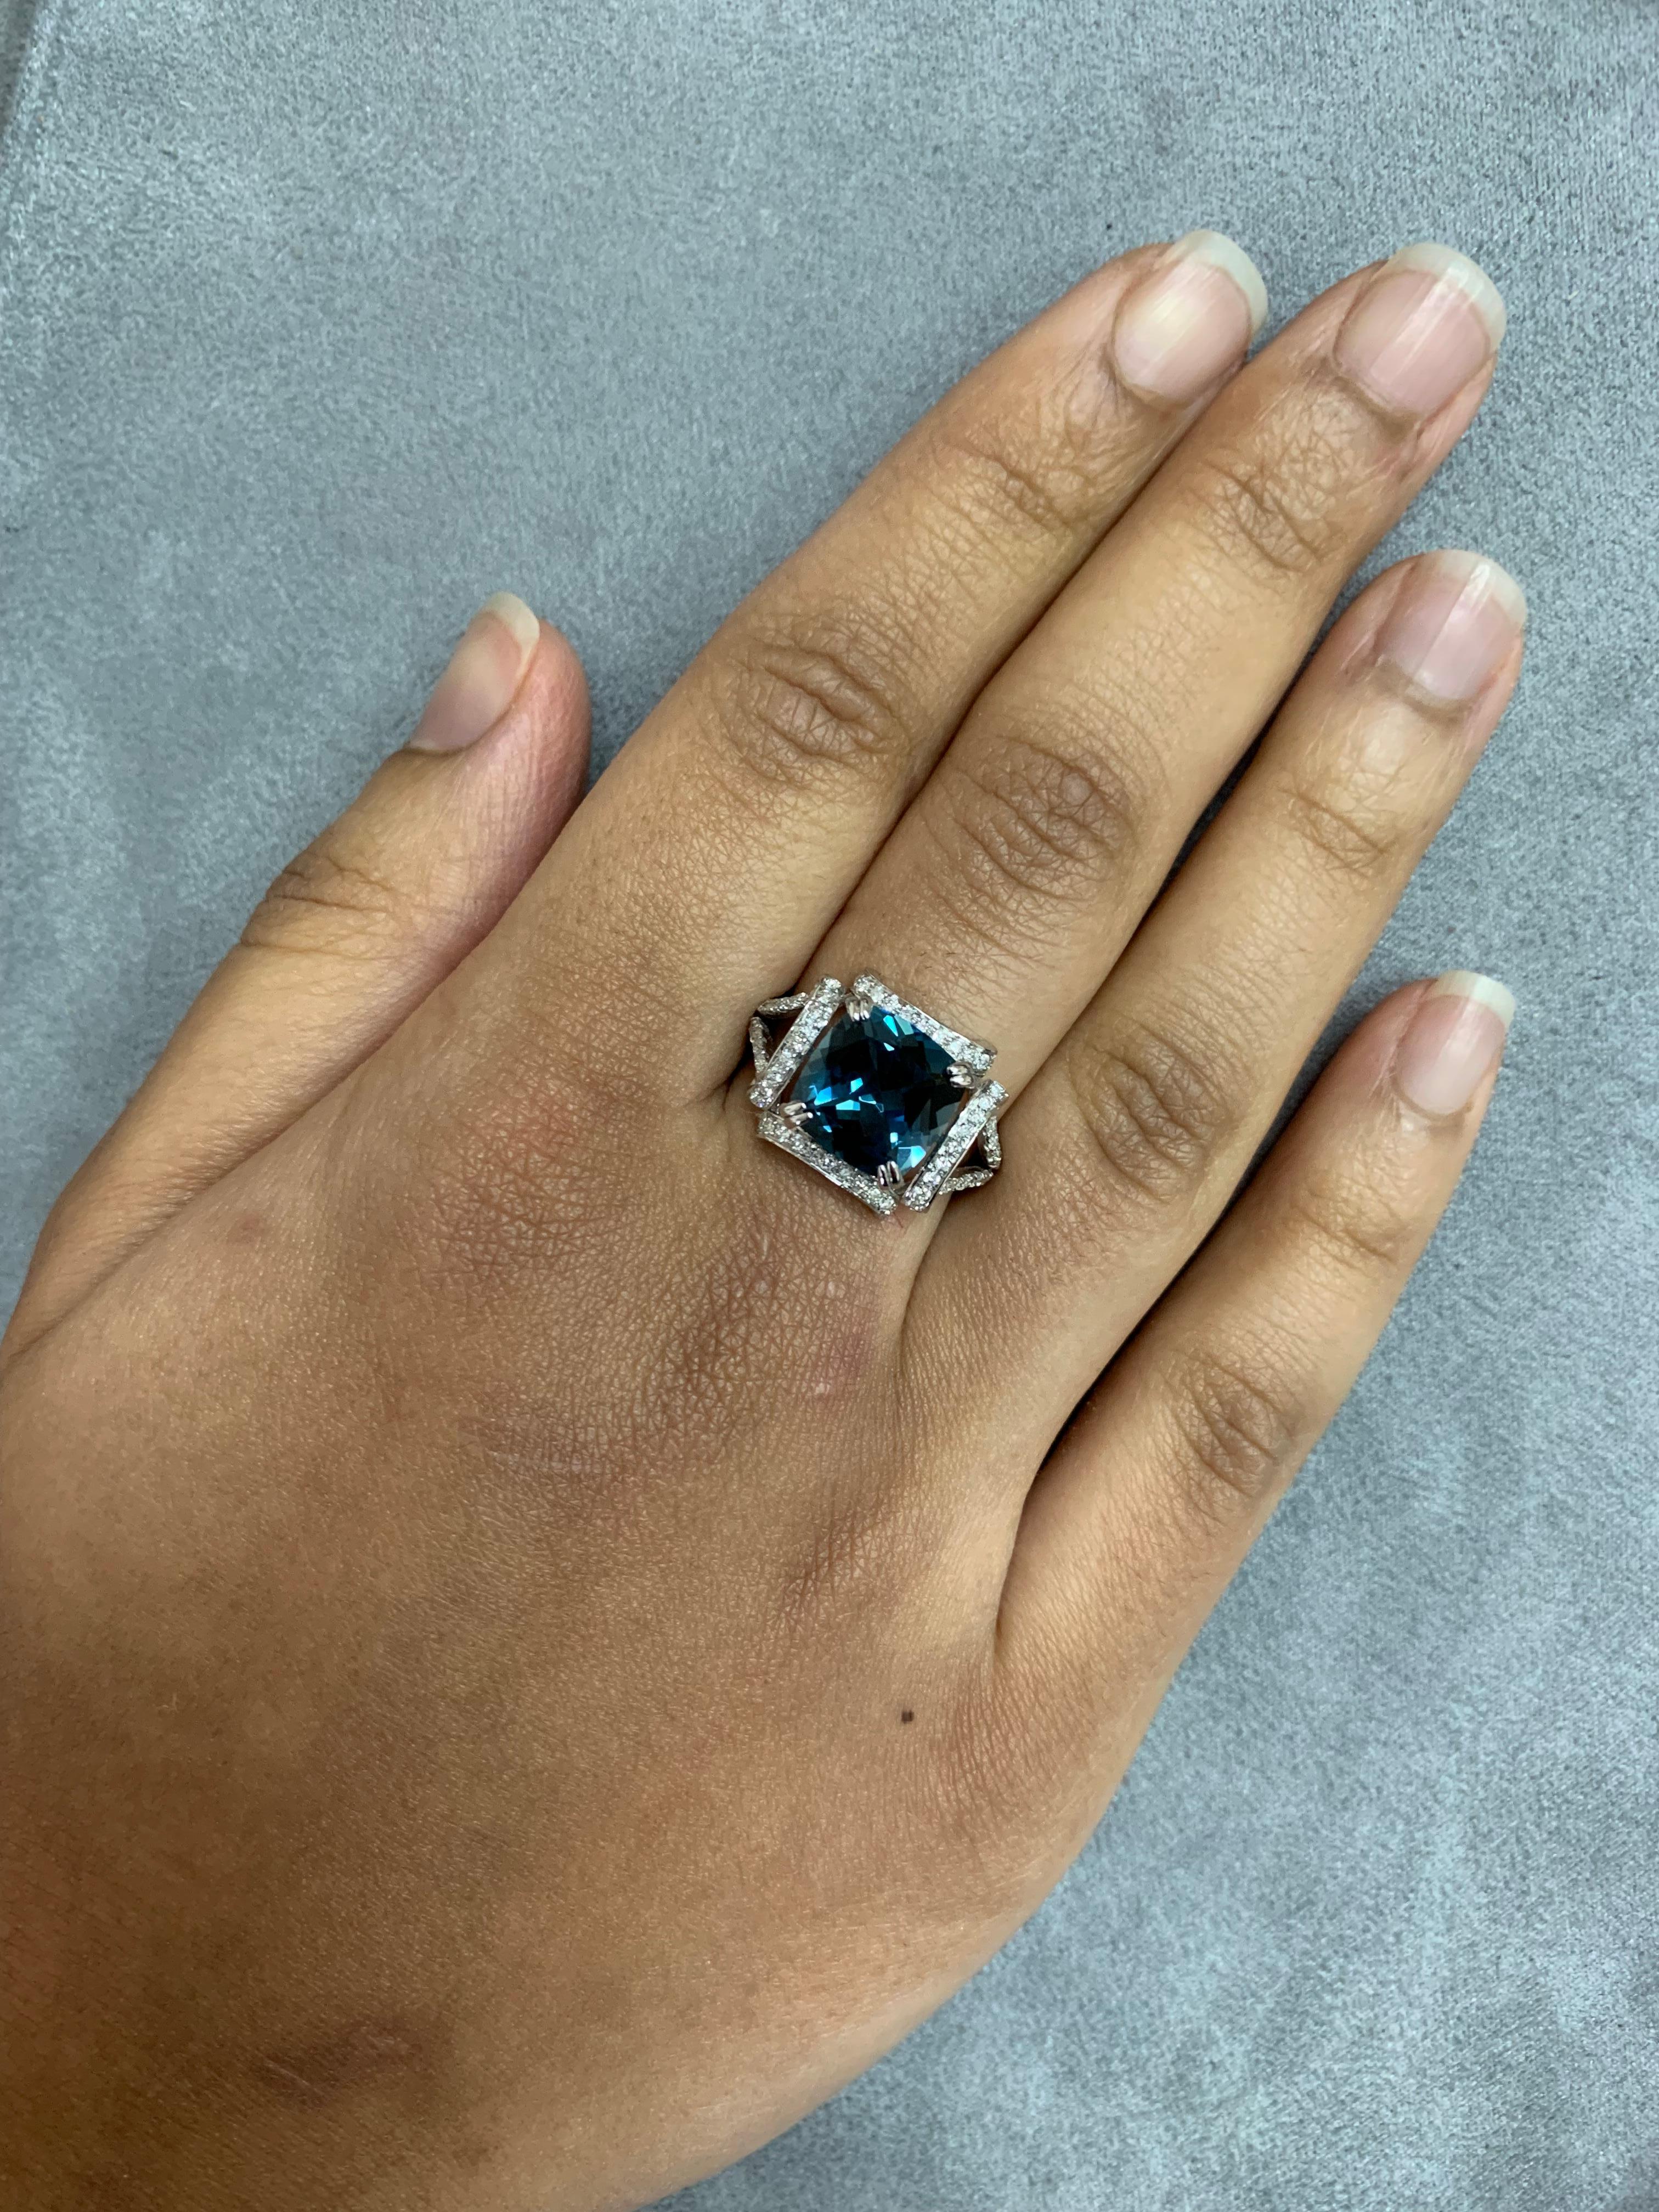 Sunita Nahata presents a collection of bold and colorful cocktail rings. This ring features a royal top london blue topaz stone at the center, with diamonds accenting the 18K white gold.  

London Blue Topaz Ring with Diamond in 18 Karat White